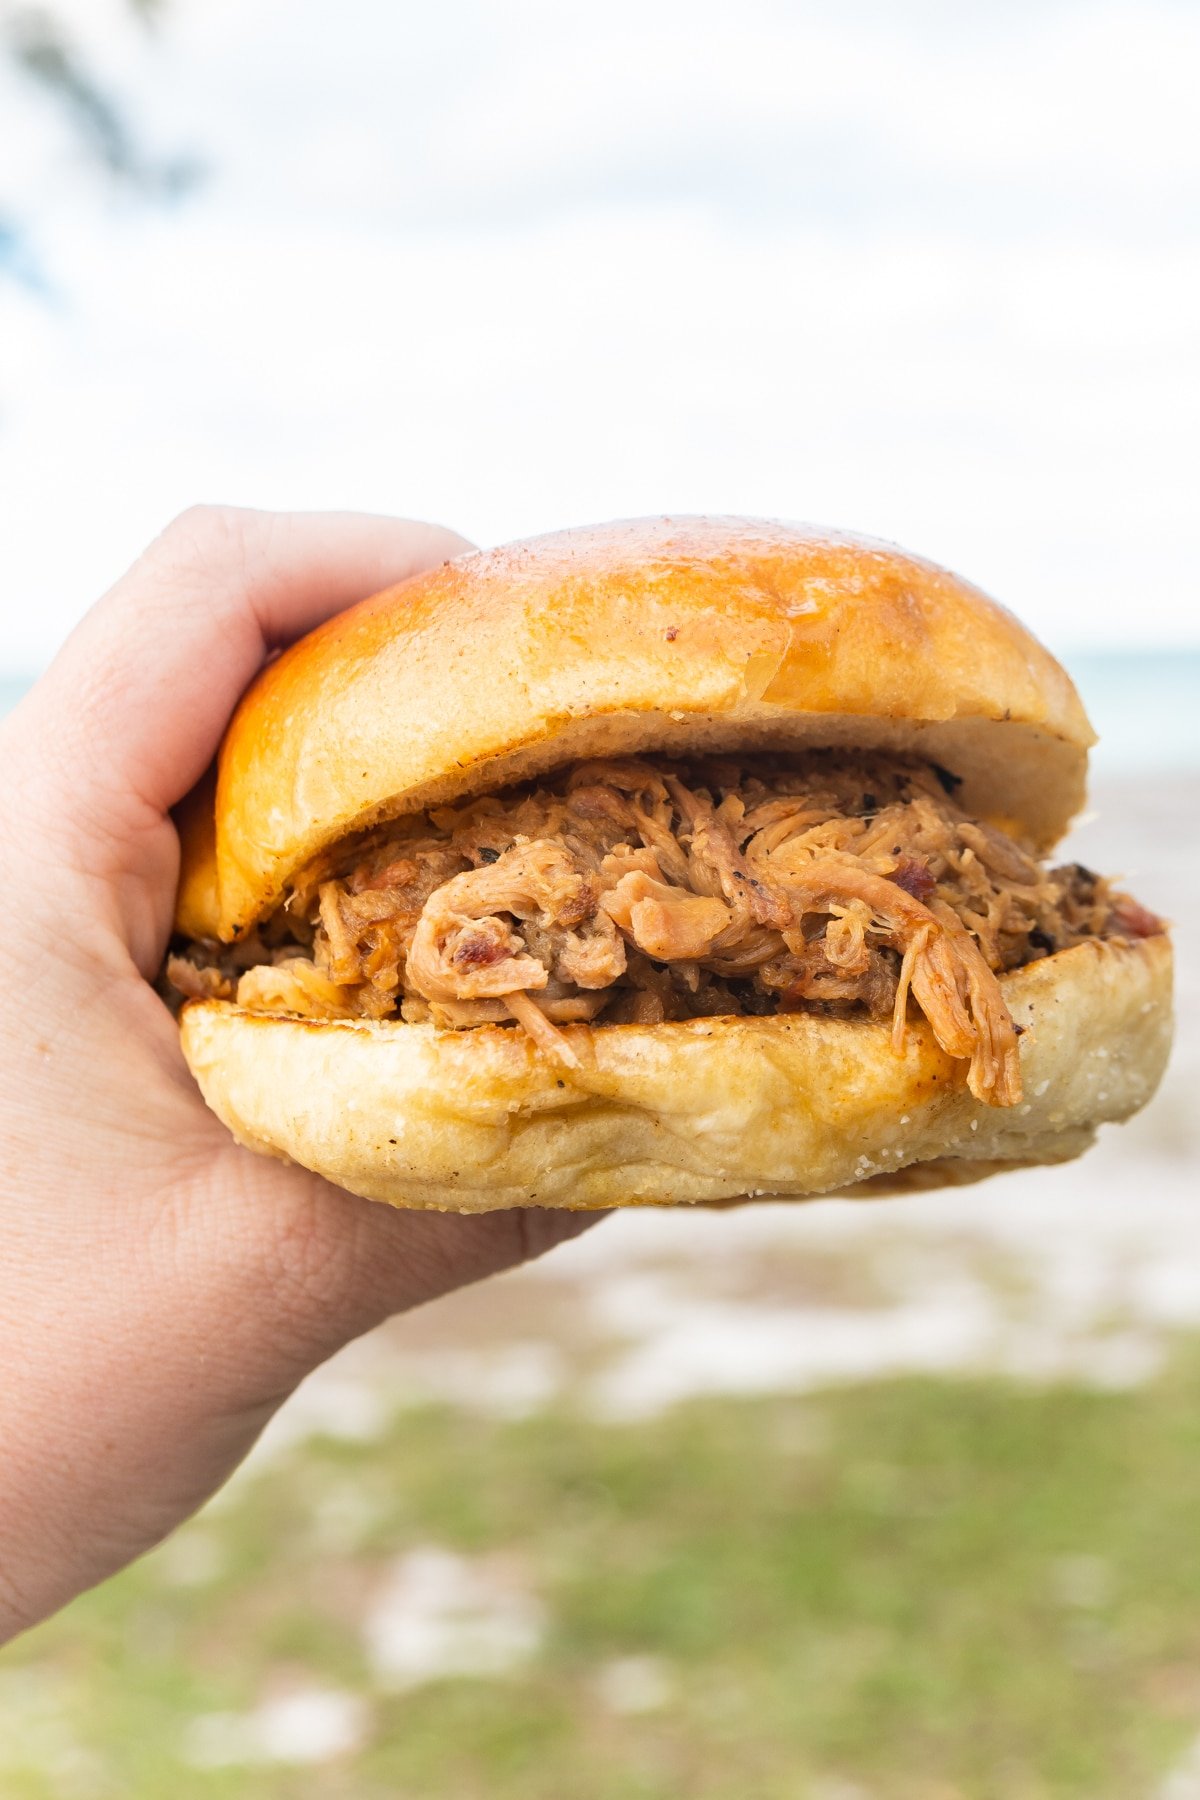 Hand holding a pulled pork sandwich